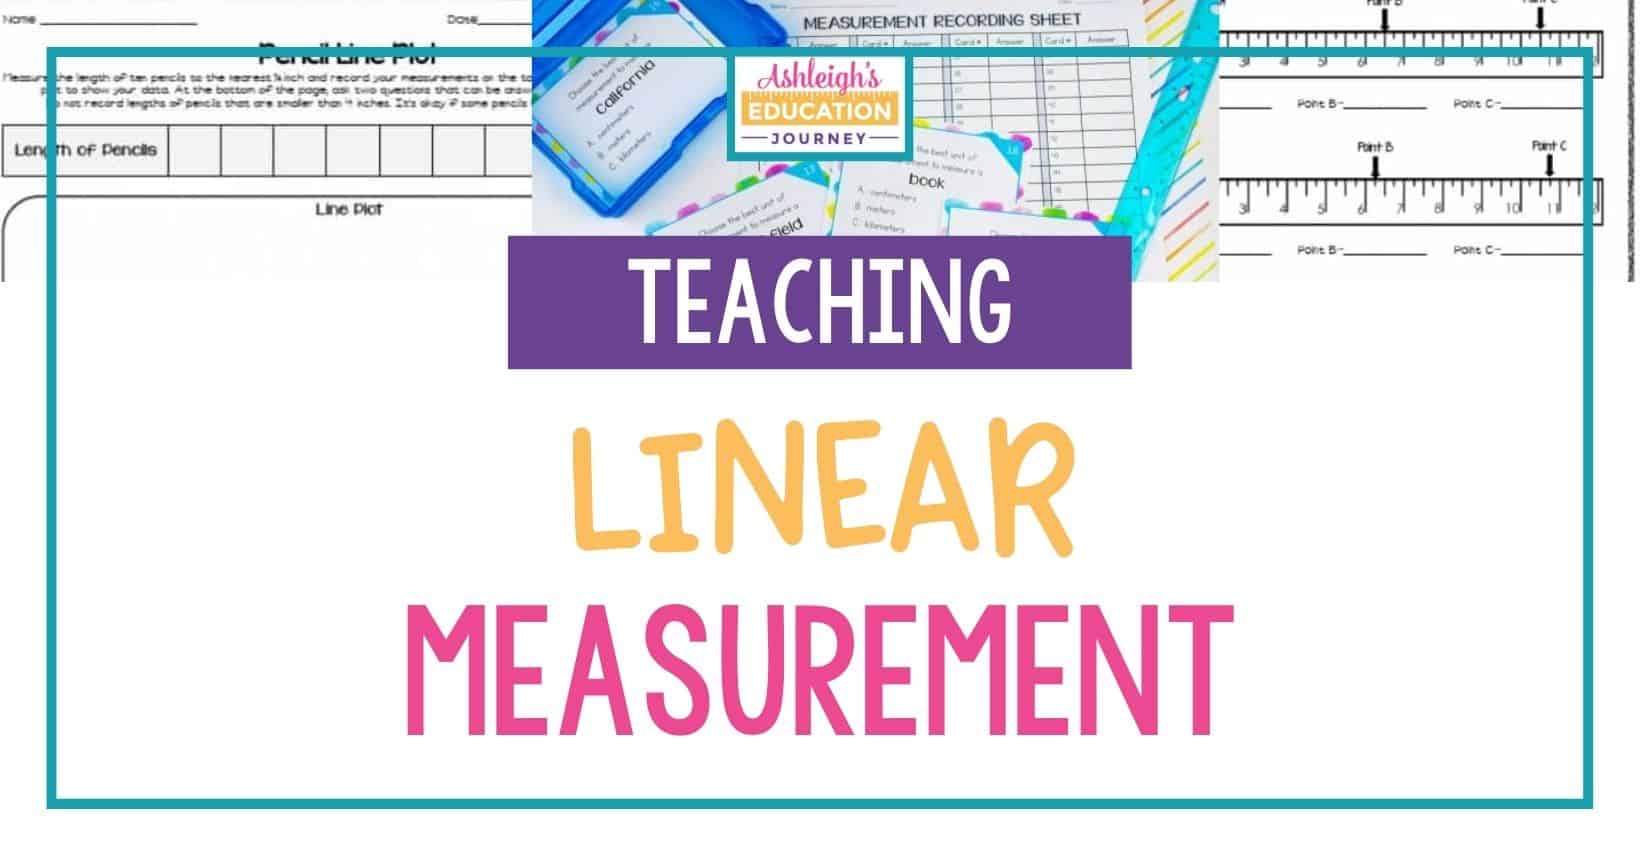 Measuring Tape Book: Math, Reading Fractions, Converting Inches